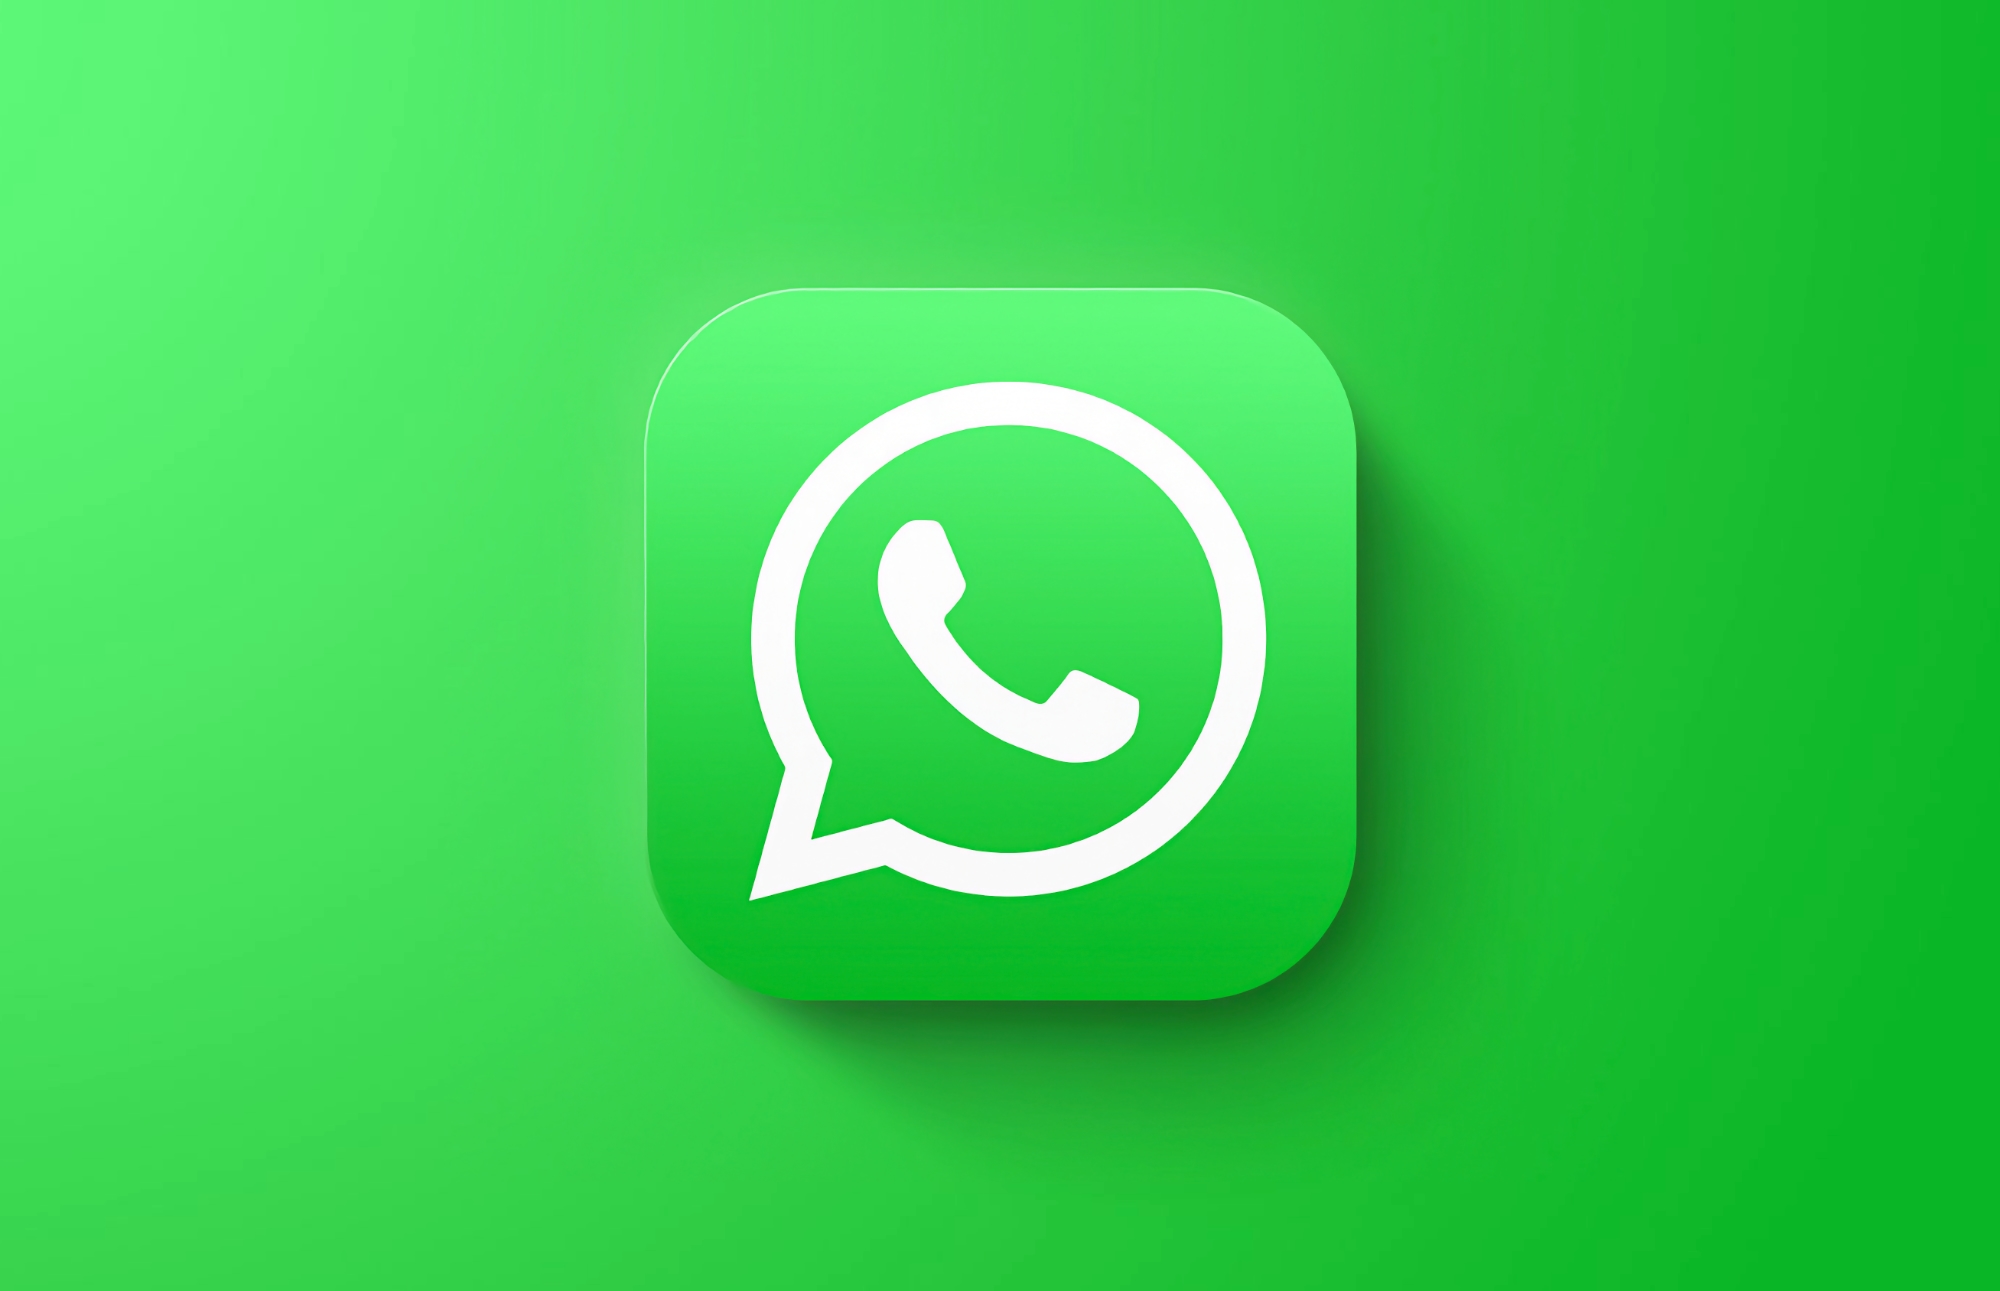 WhatsApp announced an app for Mac with native support for Apple Silicon